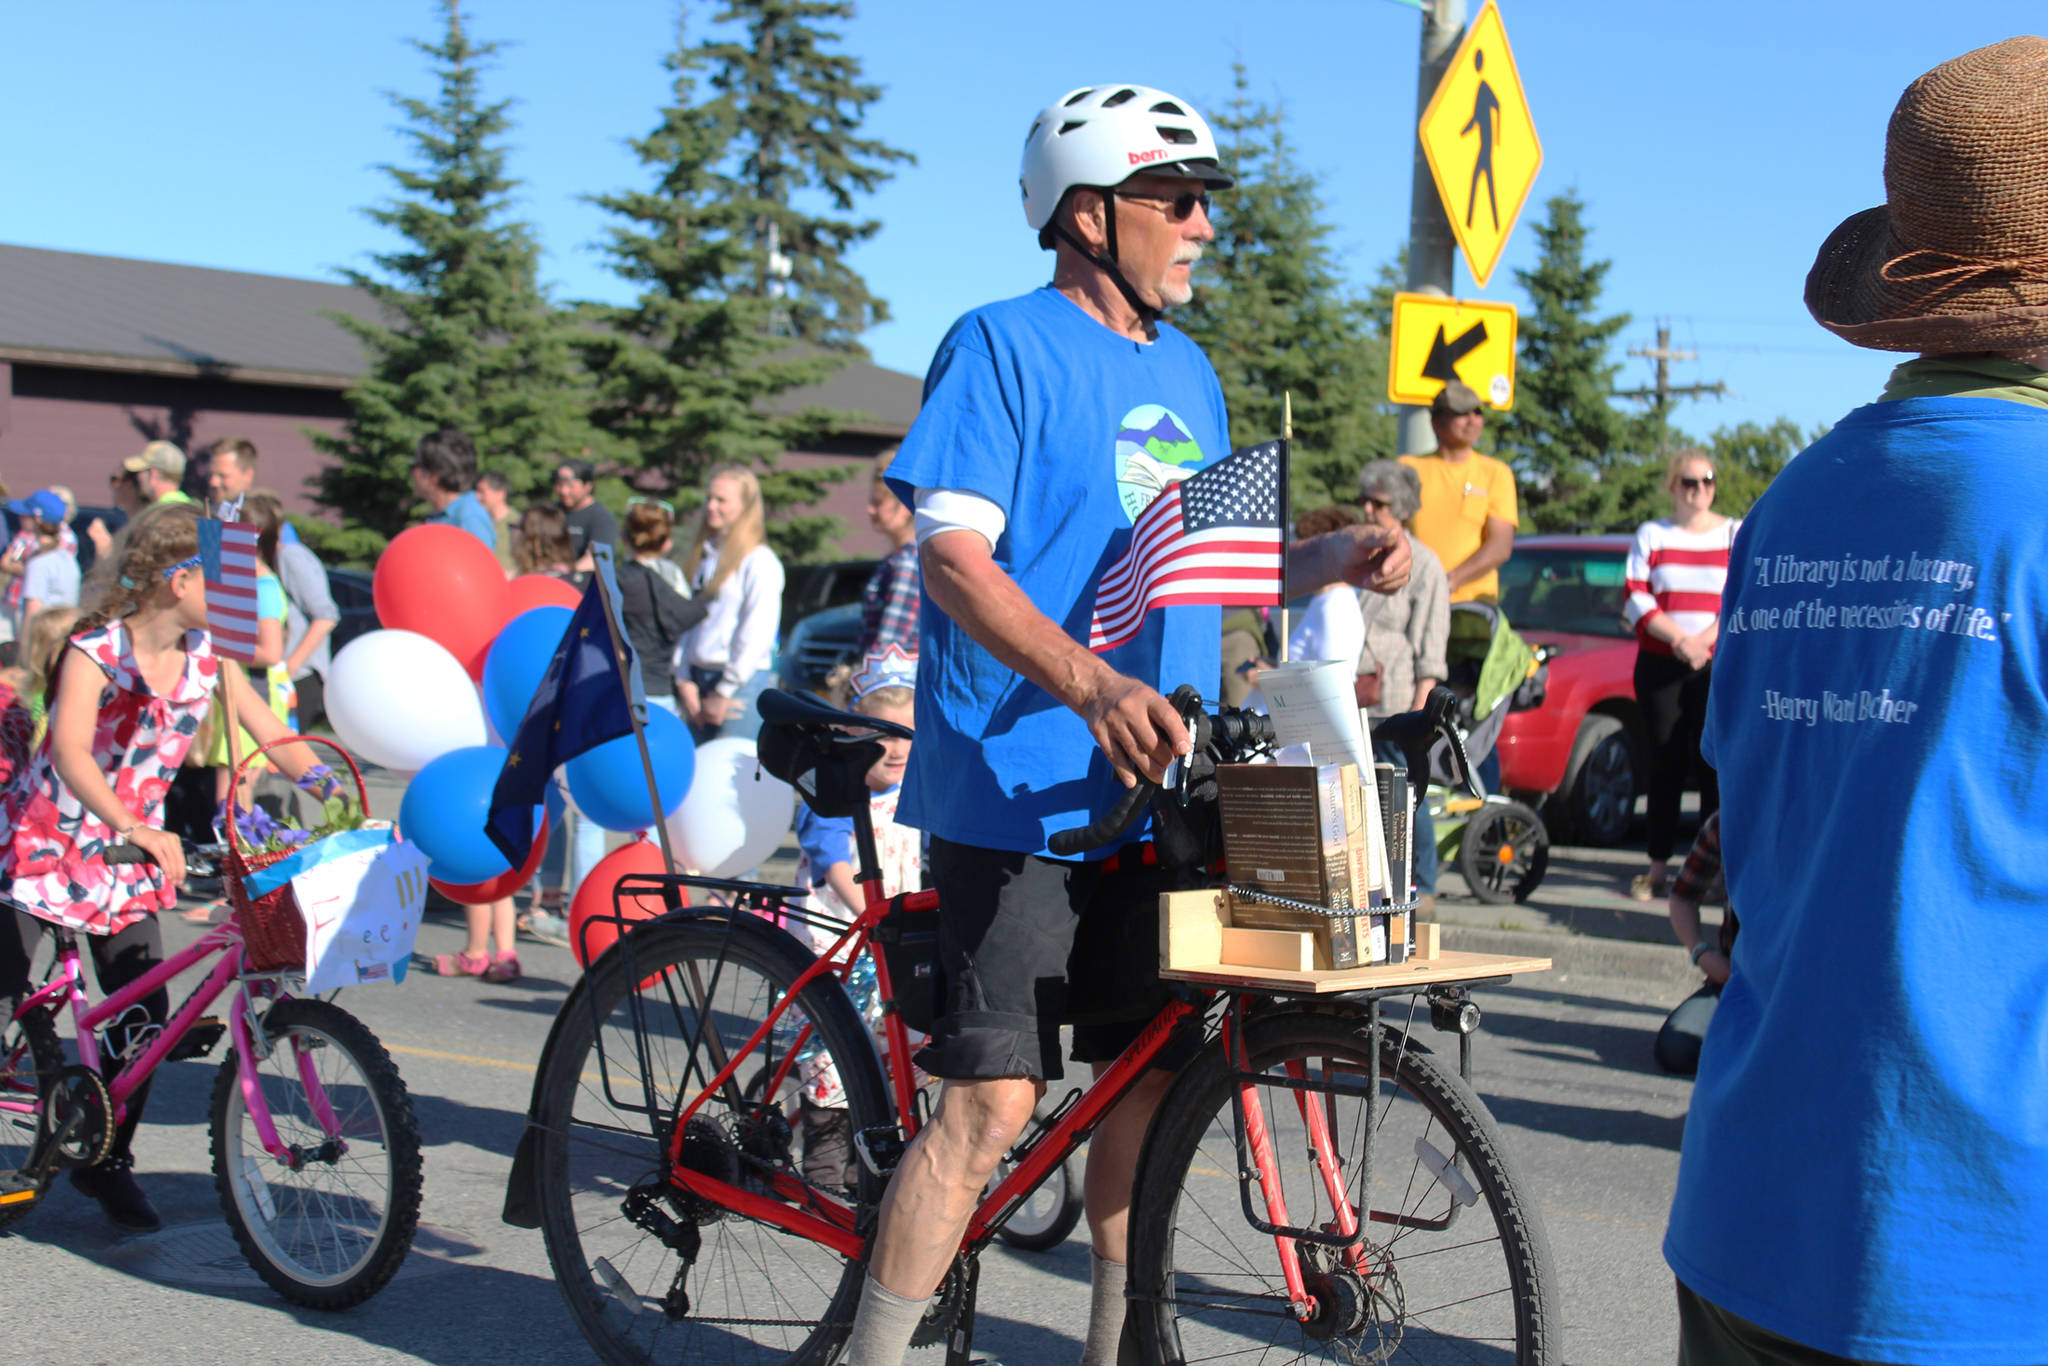 Wayne Adderhold moves along with the Friends of the Homer Library during this year’s Independence Day parade Wednesday, July 4, 2018 on Pioneer Avenue in Homer, Alaska. The friends handed out books to children as they marched and performed their own book-focused dance. (Photo by Megan Pacer/Homer News)